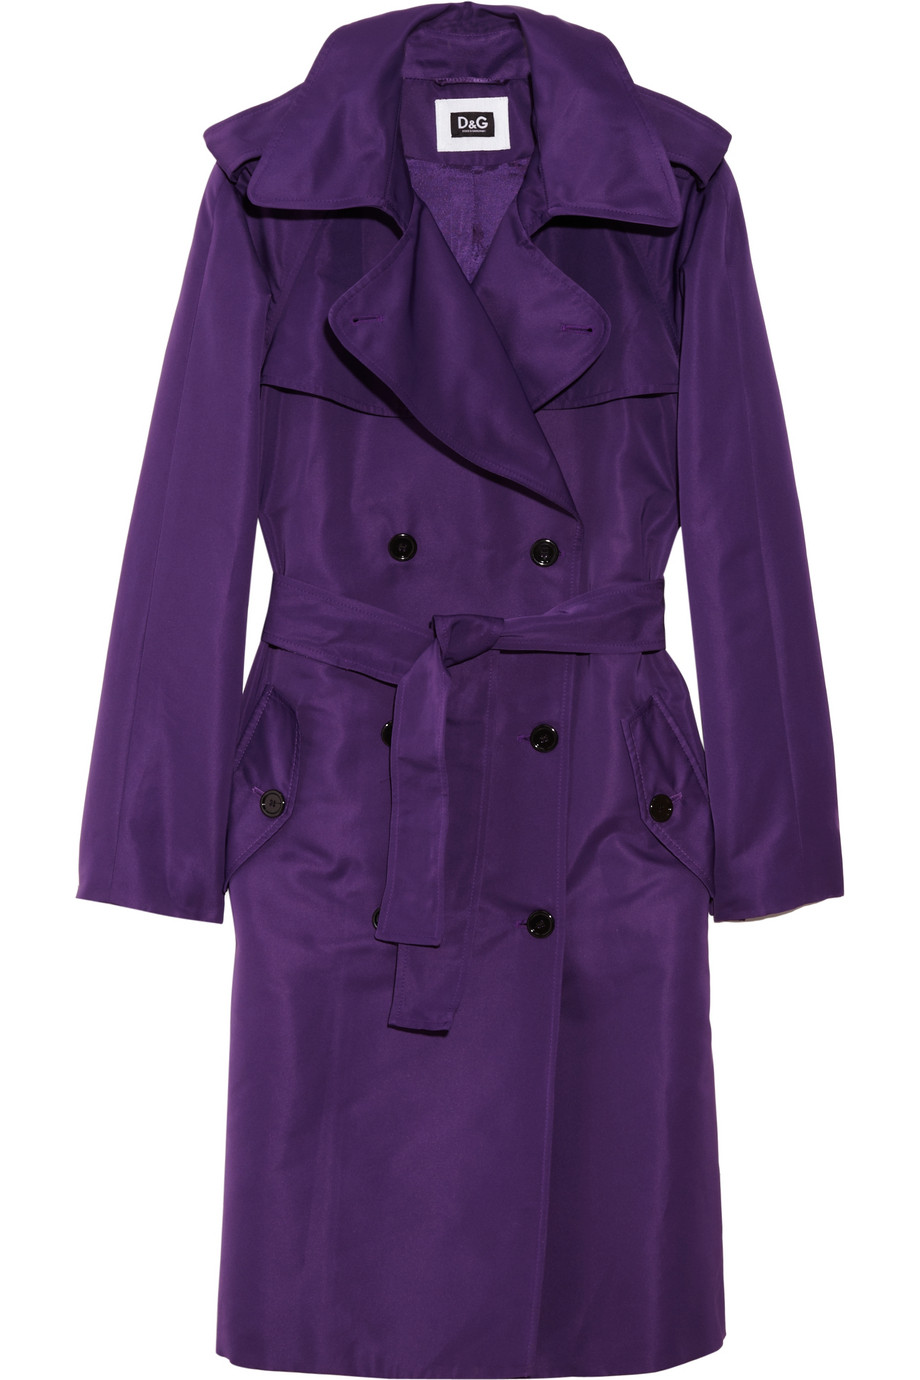 Dolce & gabbana Double-Beasted Sateen Trench Coat in Purple | Lyst